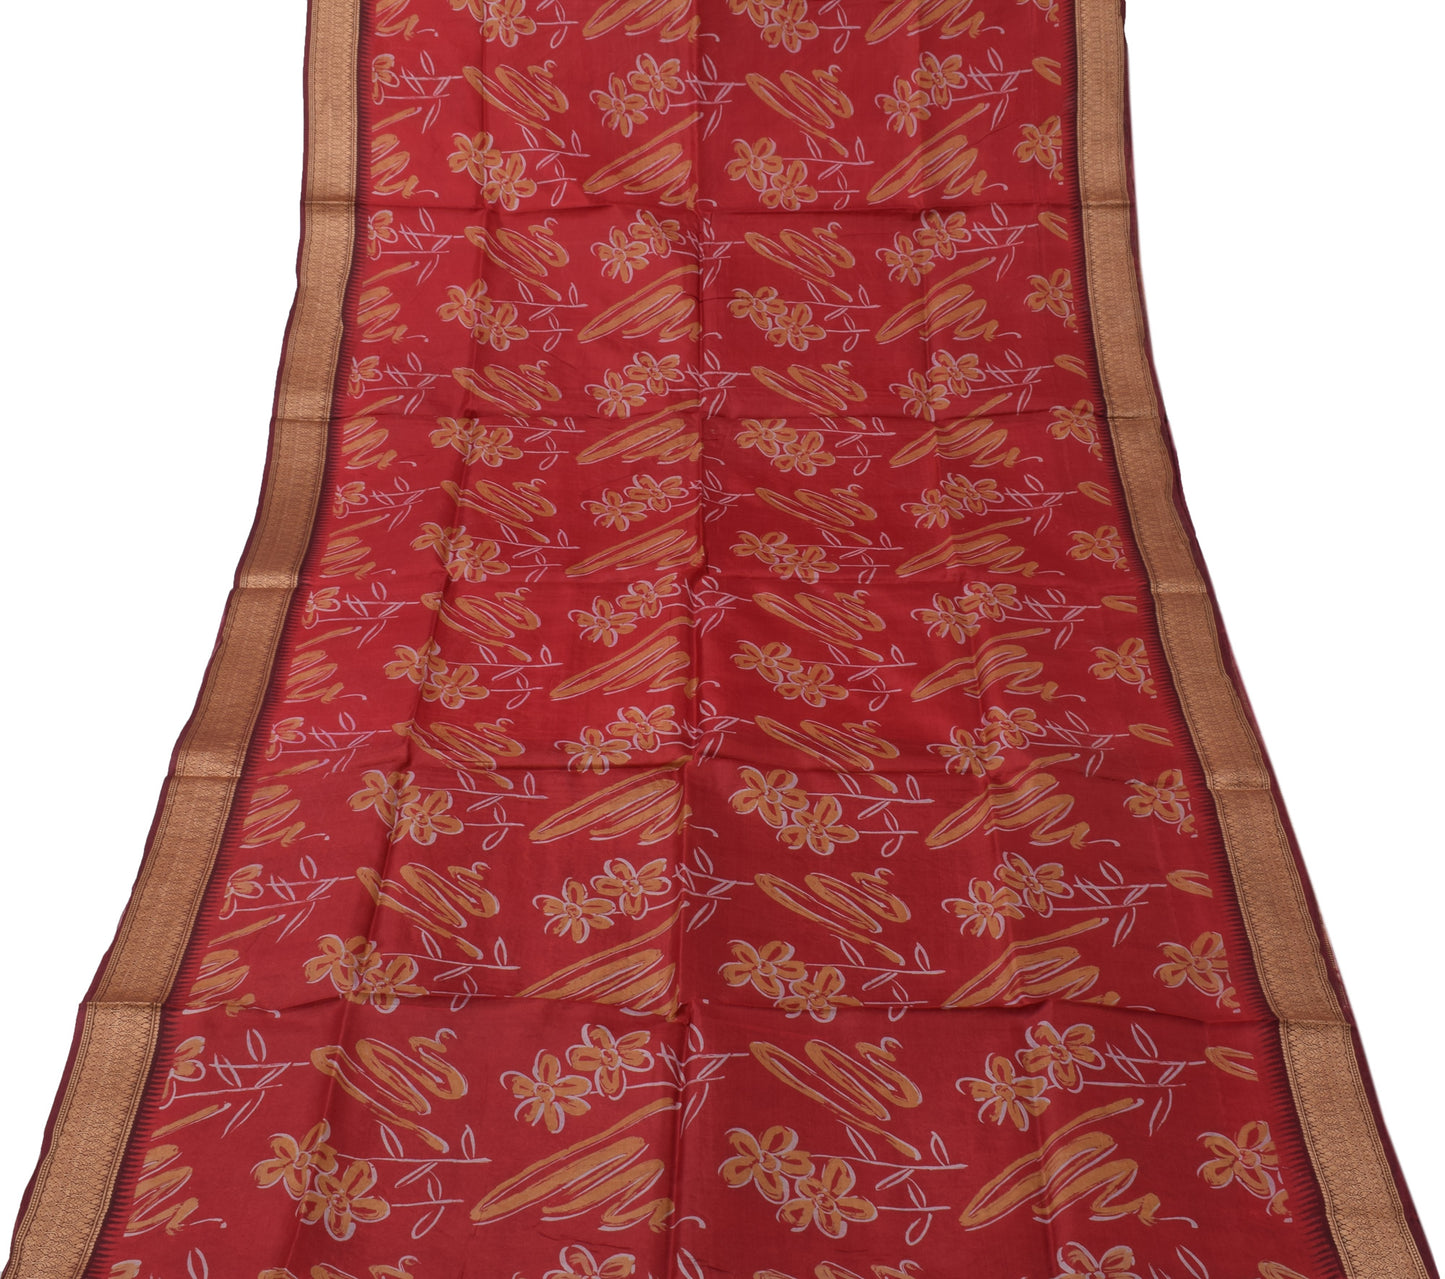 Sushila Vintage Red Saree 100% Pure Silk Printed & Woven Soft Craft 5 YD Fabric